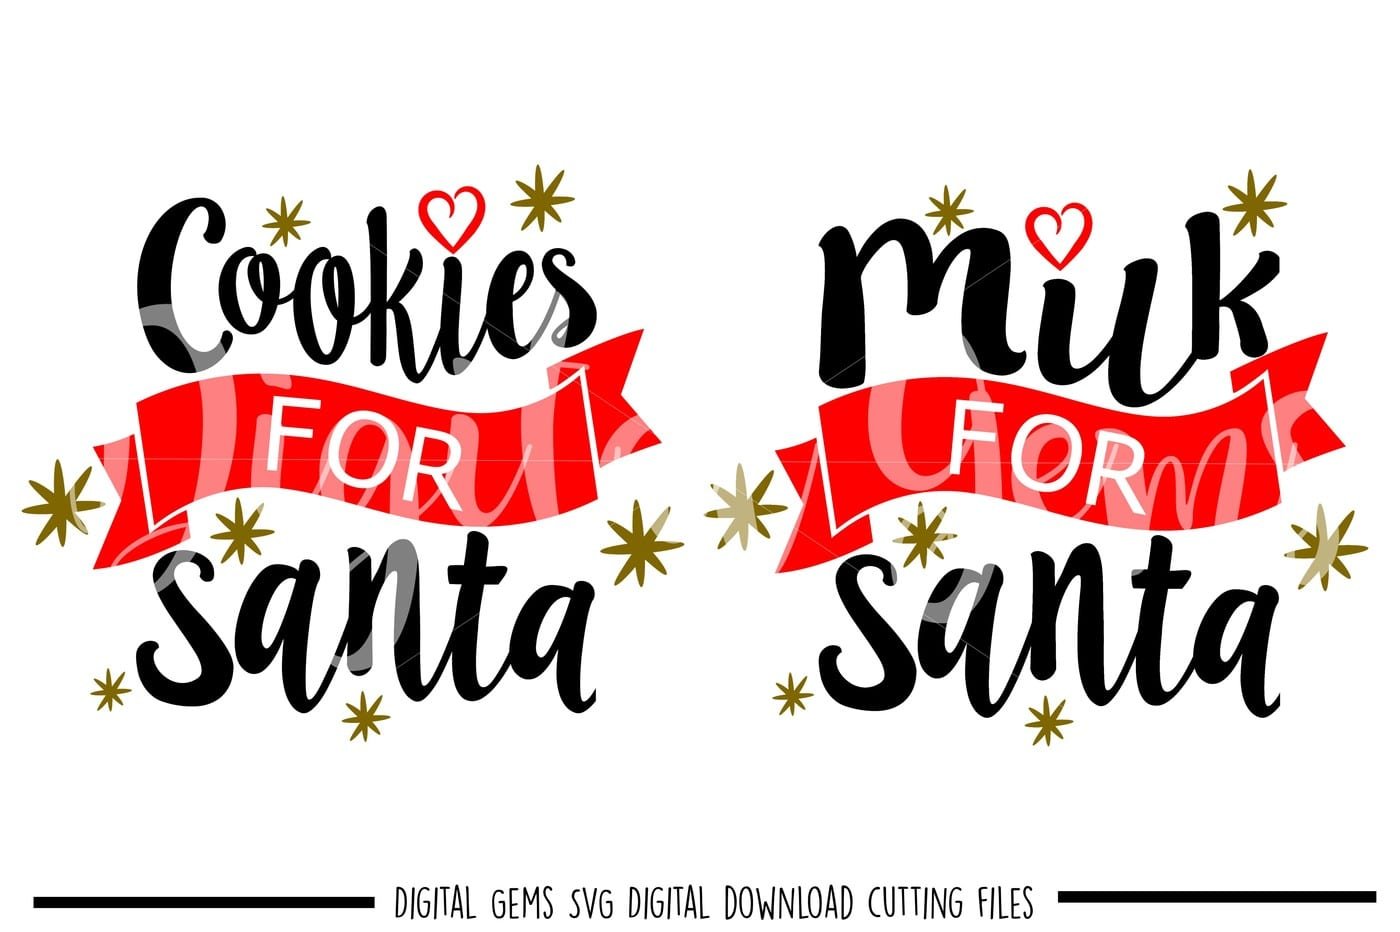 Cookies For Santa And Milk For Santa Svg   Dxf   Eps   Png Files